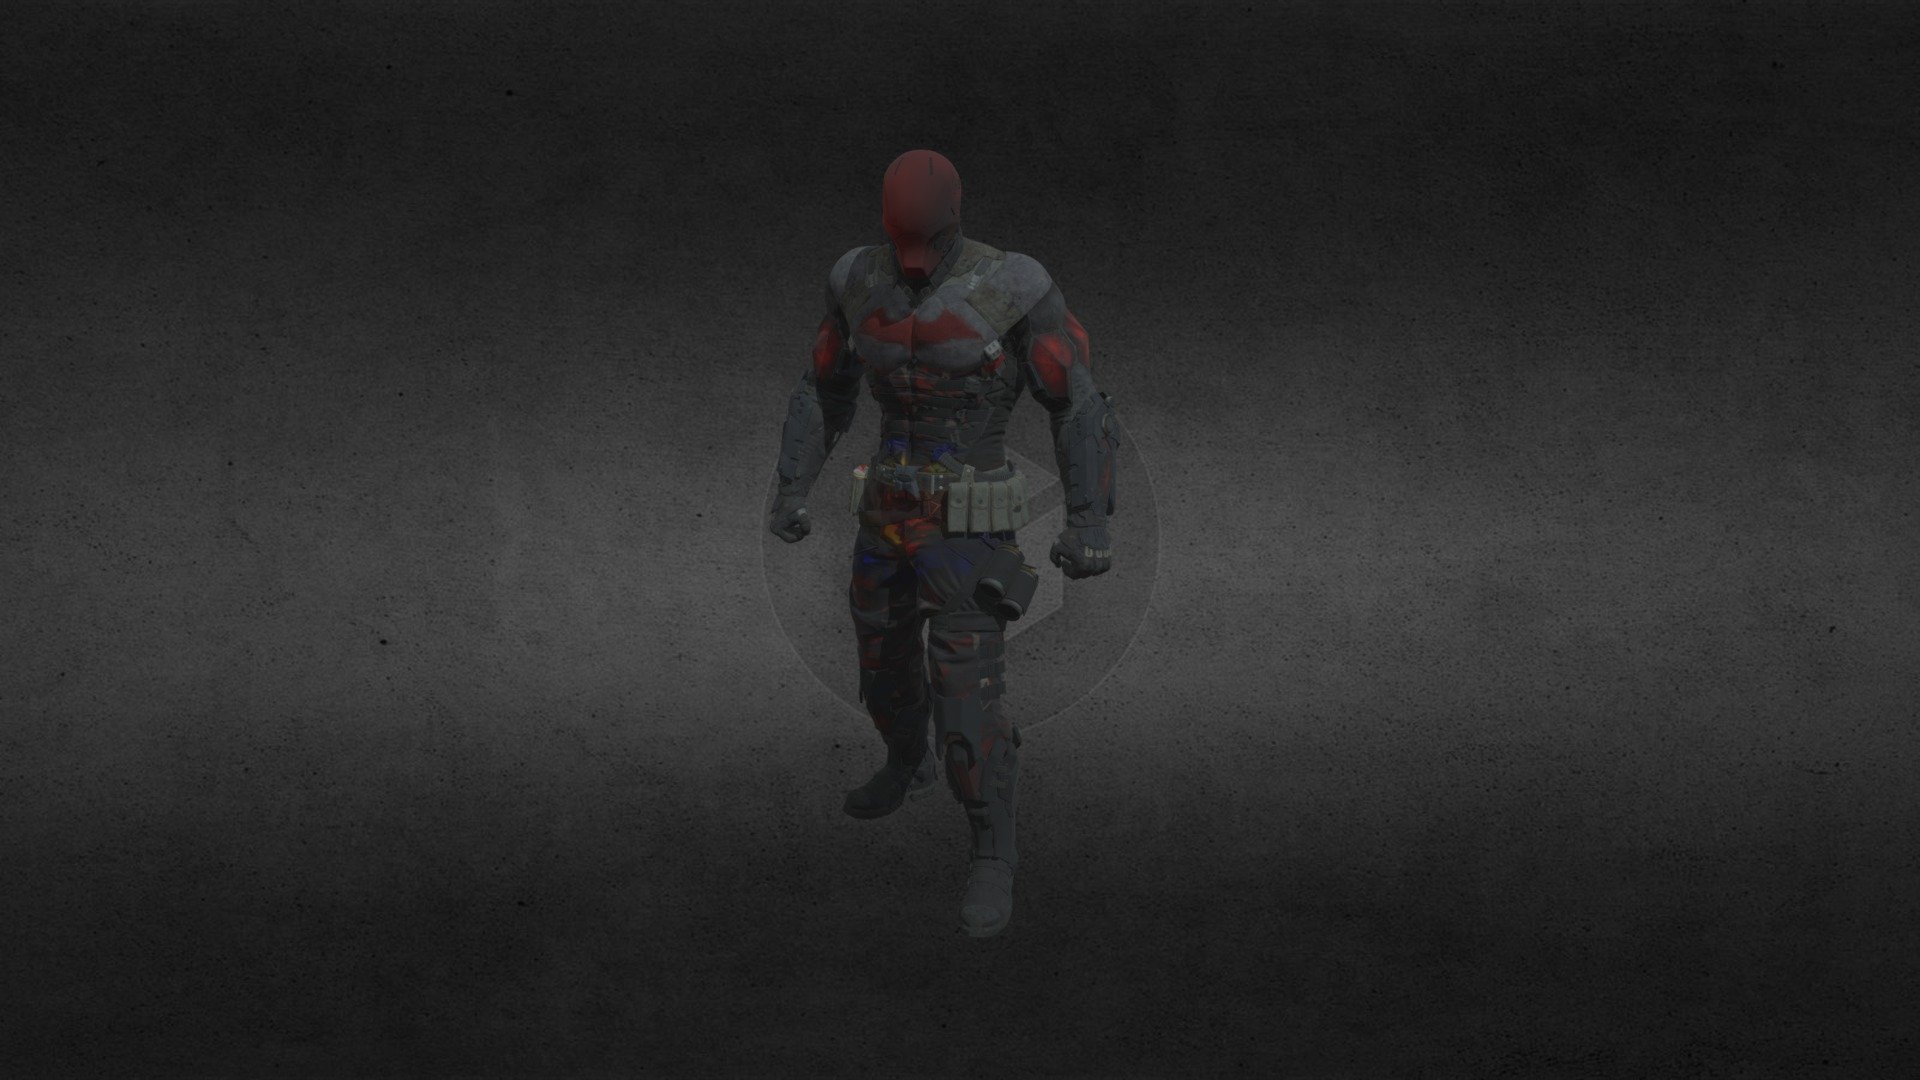 Red hood (Jason Todd) Story Mode From Batman: Arkham Knight | Model Ripped From The Game By Me | The Rig is From The Game (Not Mixamo) | Follow Me For More Arkham Models - Redhood BAK From Story Mode - Download Free 3D model by JustAnArkhamKnightMeshModder (@the_gamerlol111) 3d model